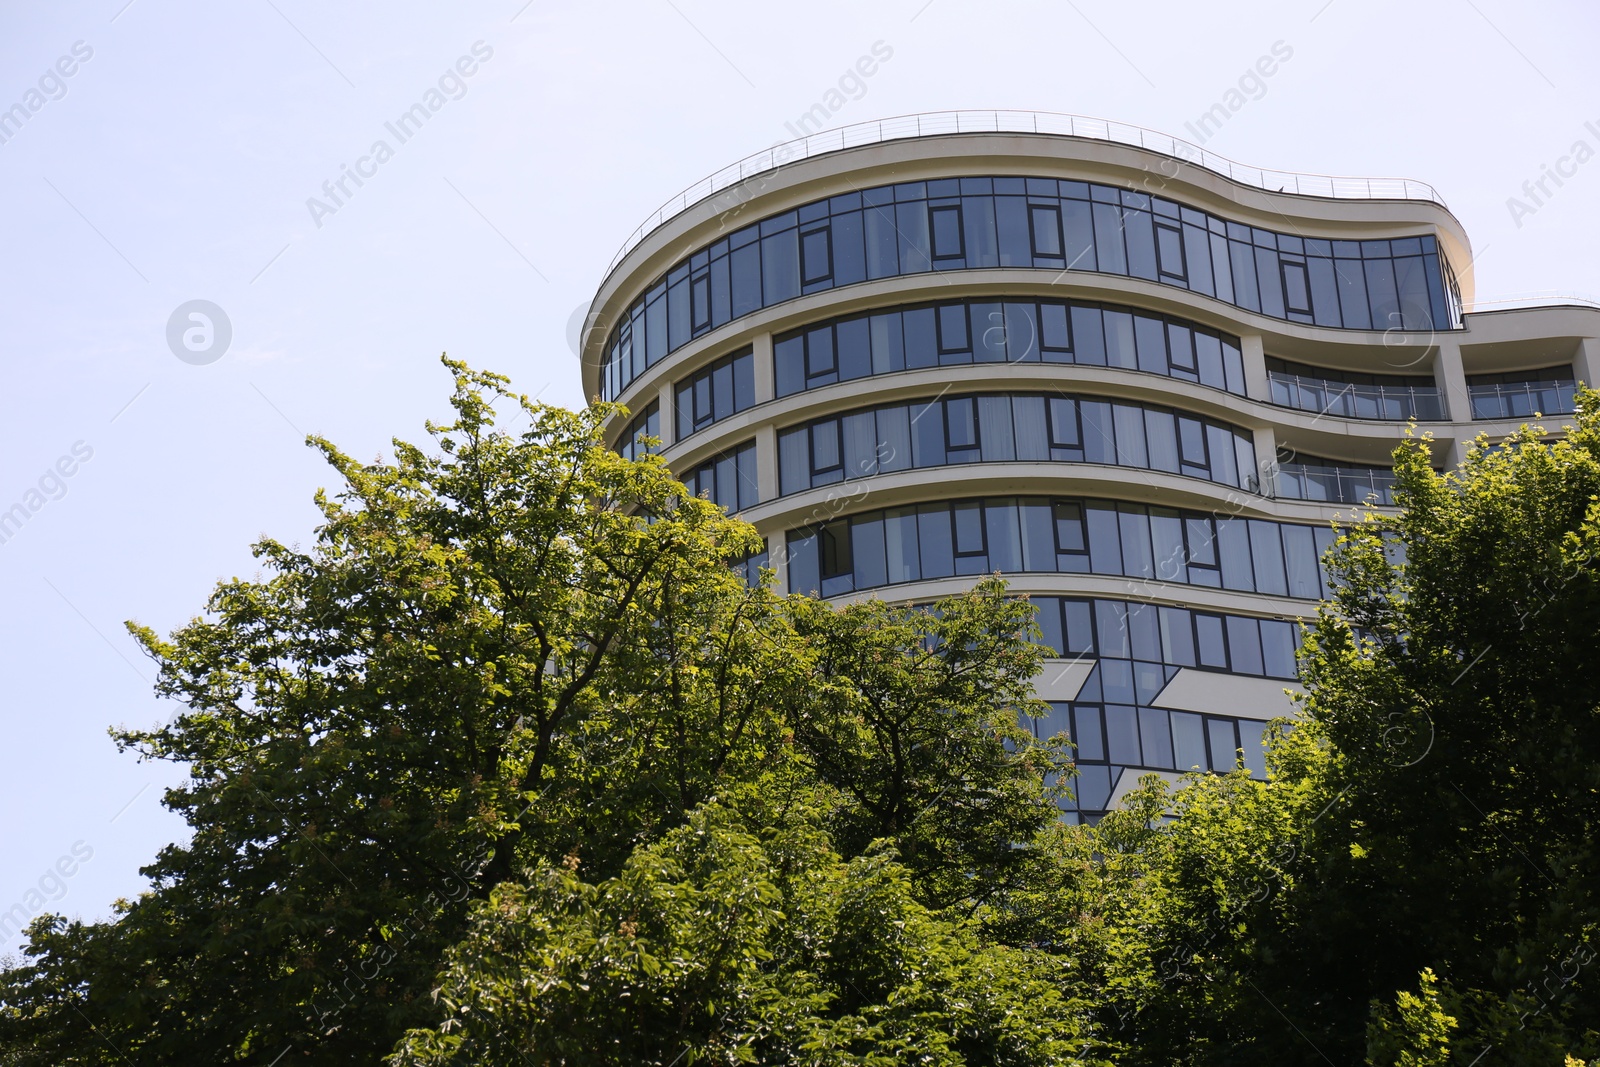 Photo of Modern building with glass windows and green trees outdoors, low angle view